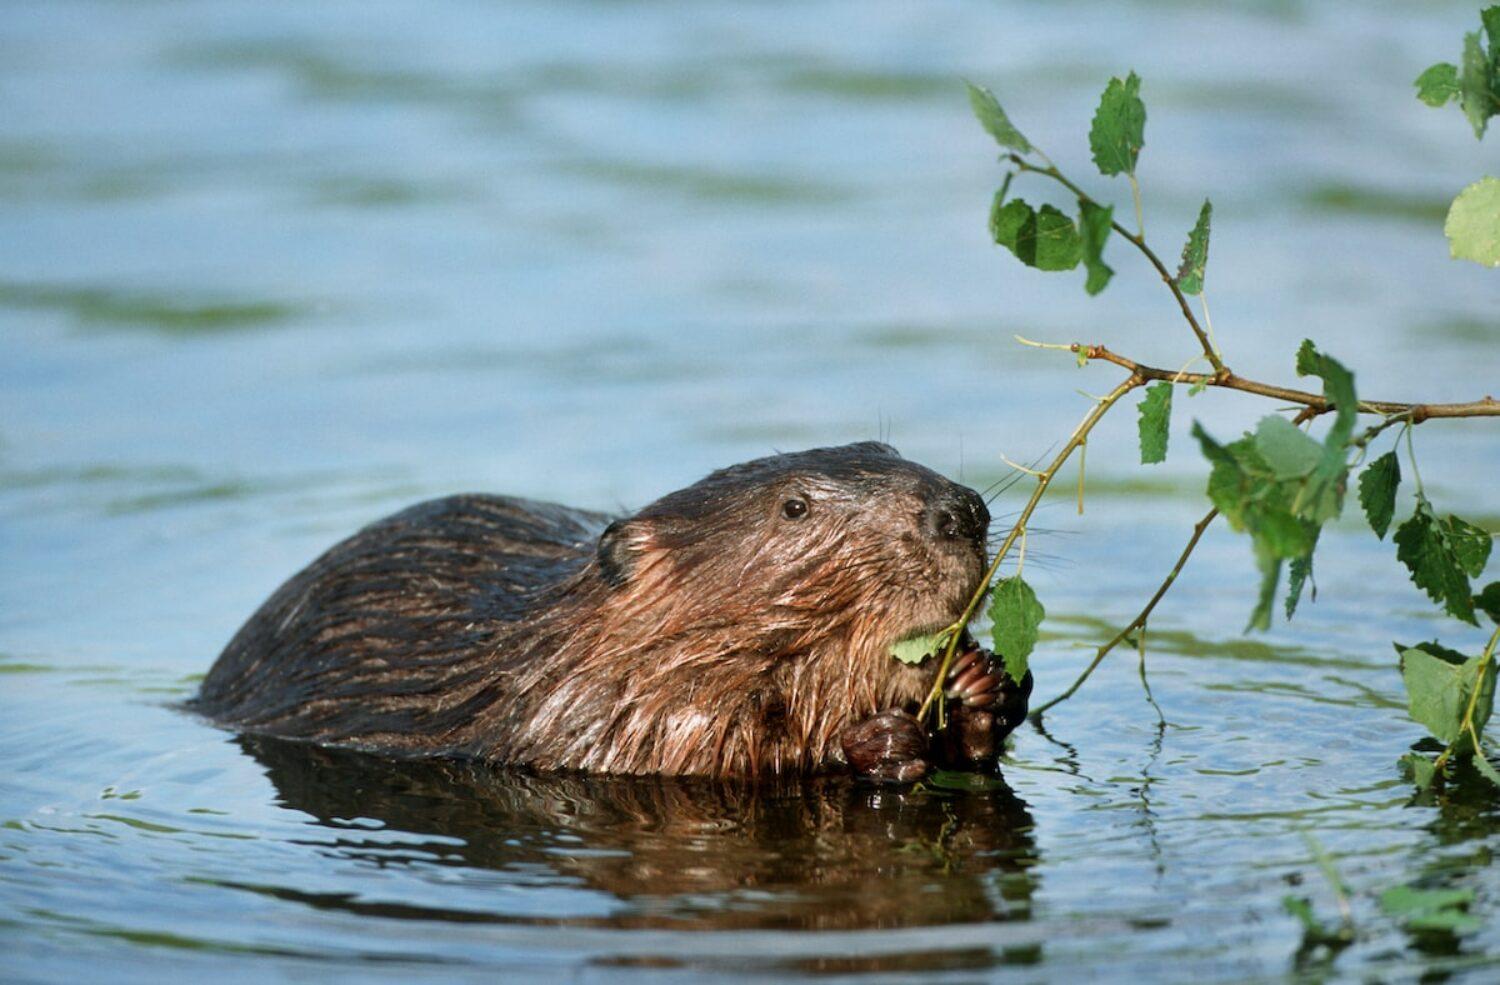 Beaver are among the species that came back to Britain